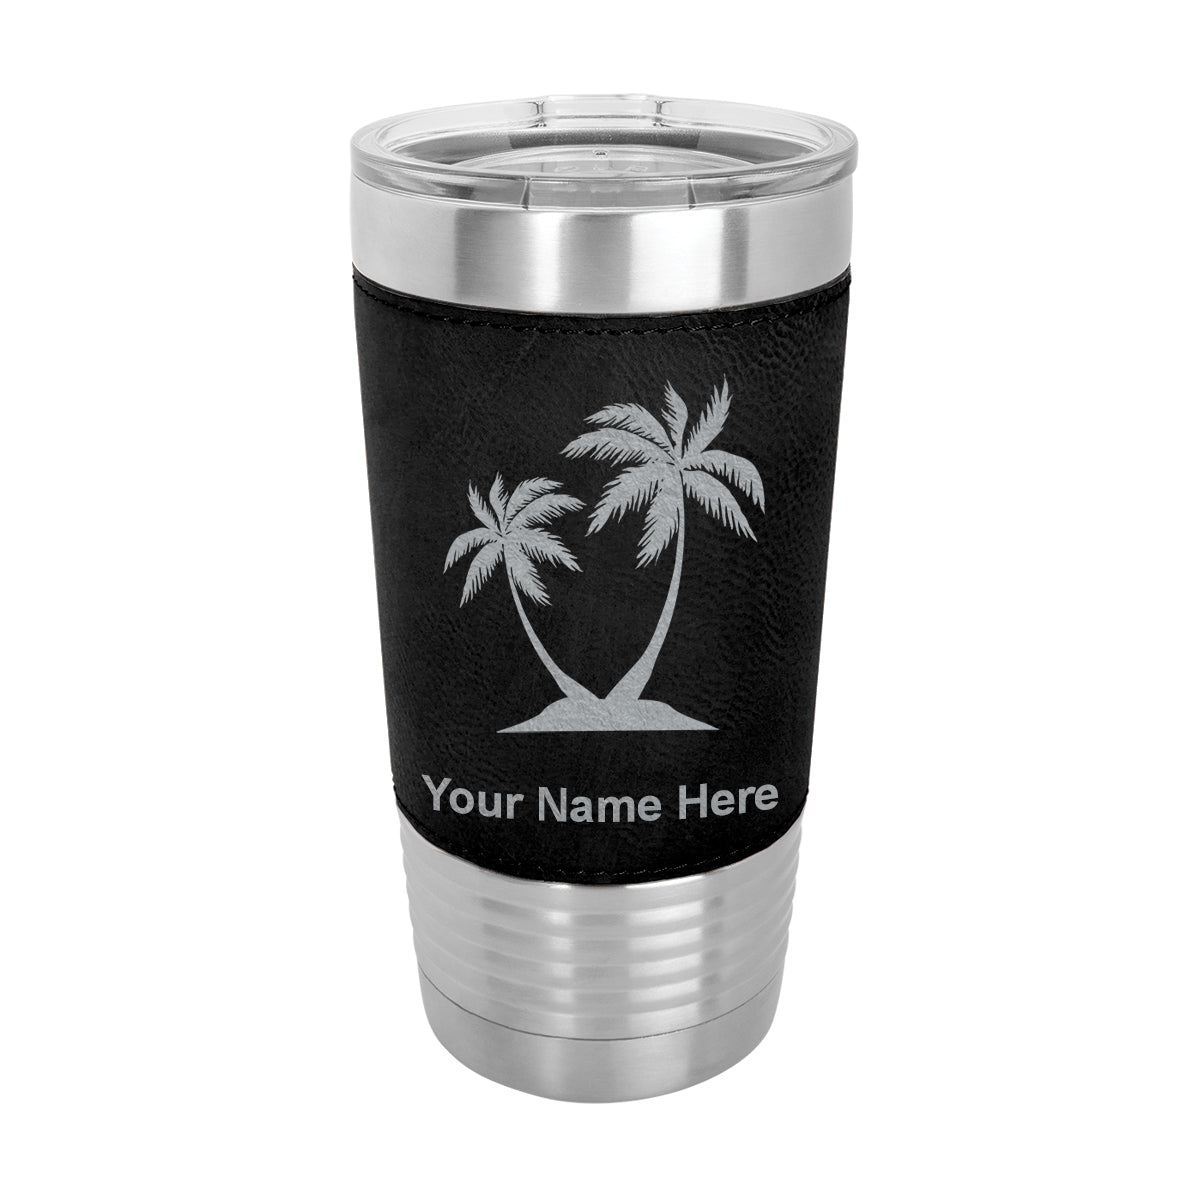 20oz Faux Leather Tumbler Mug, Palm Trees, Personalized Engraving Included - LaserGram Custom Engraved Gifts